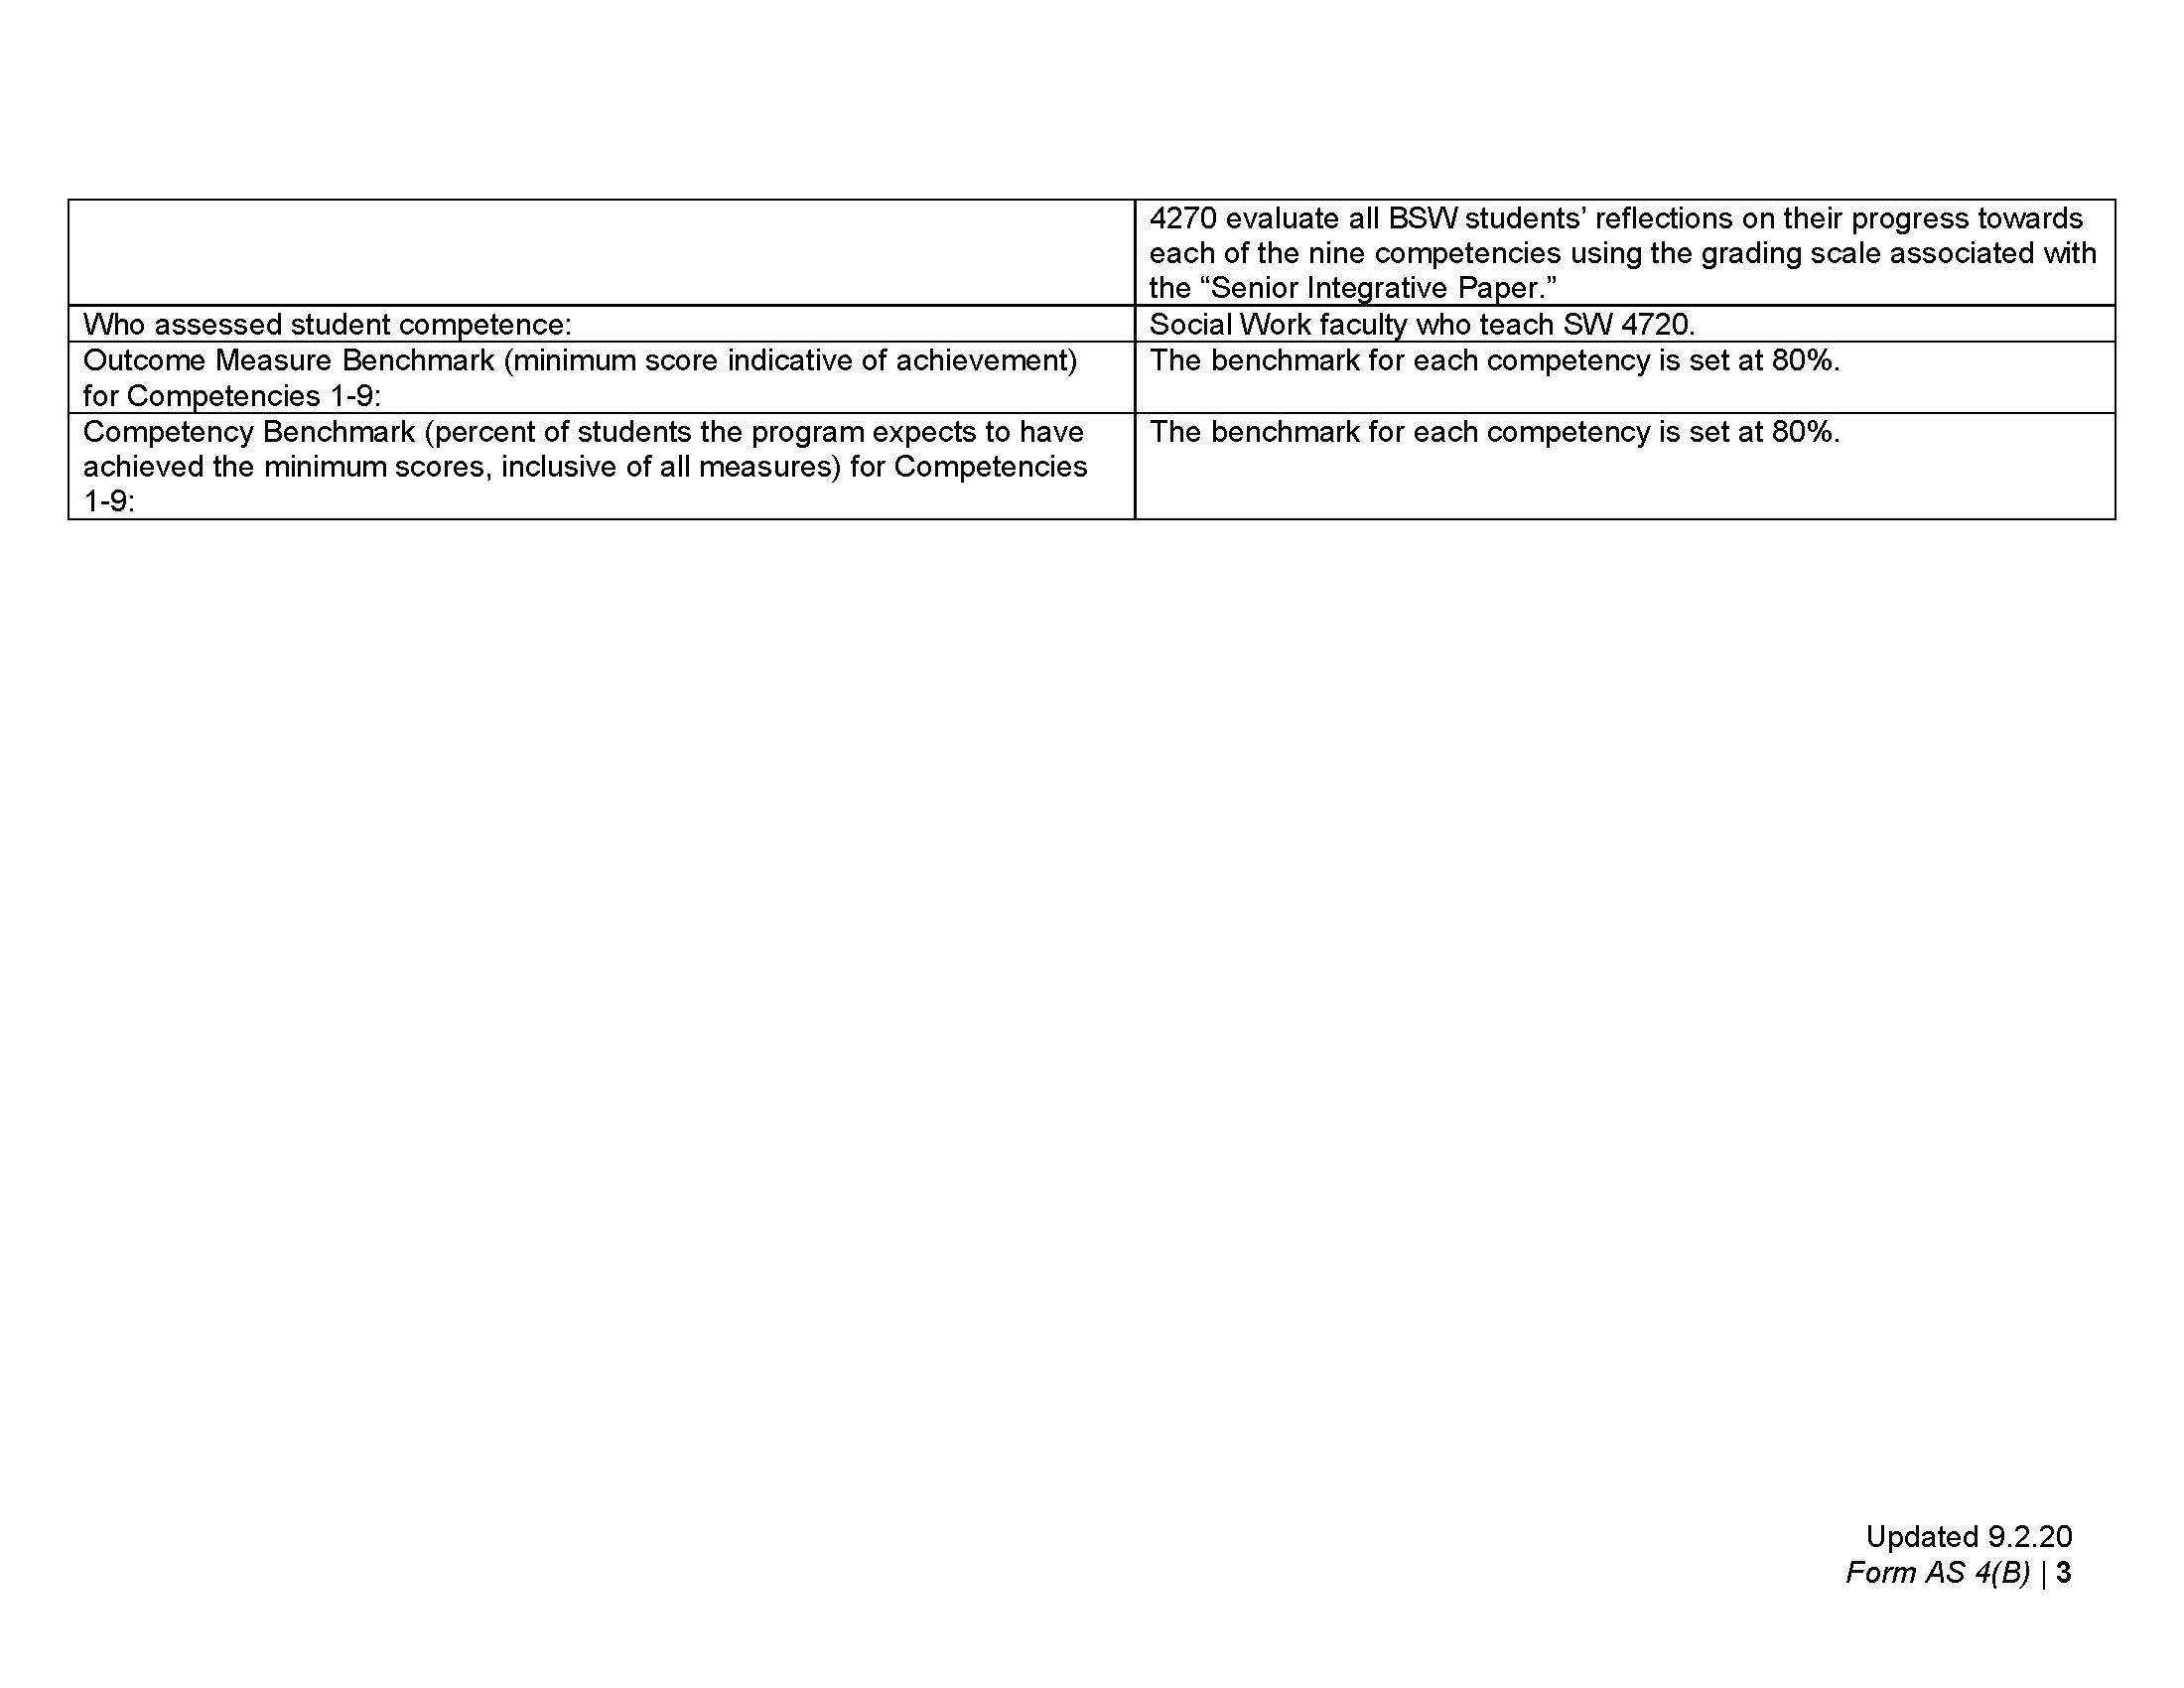 BSW Assessment Outcomes Page 3